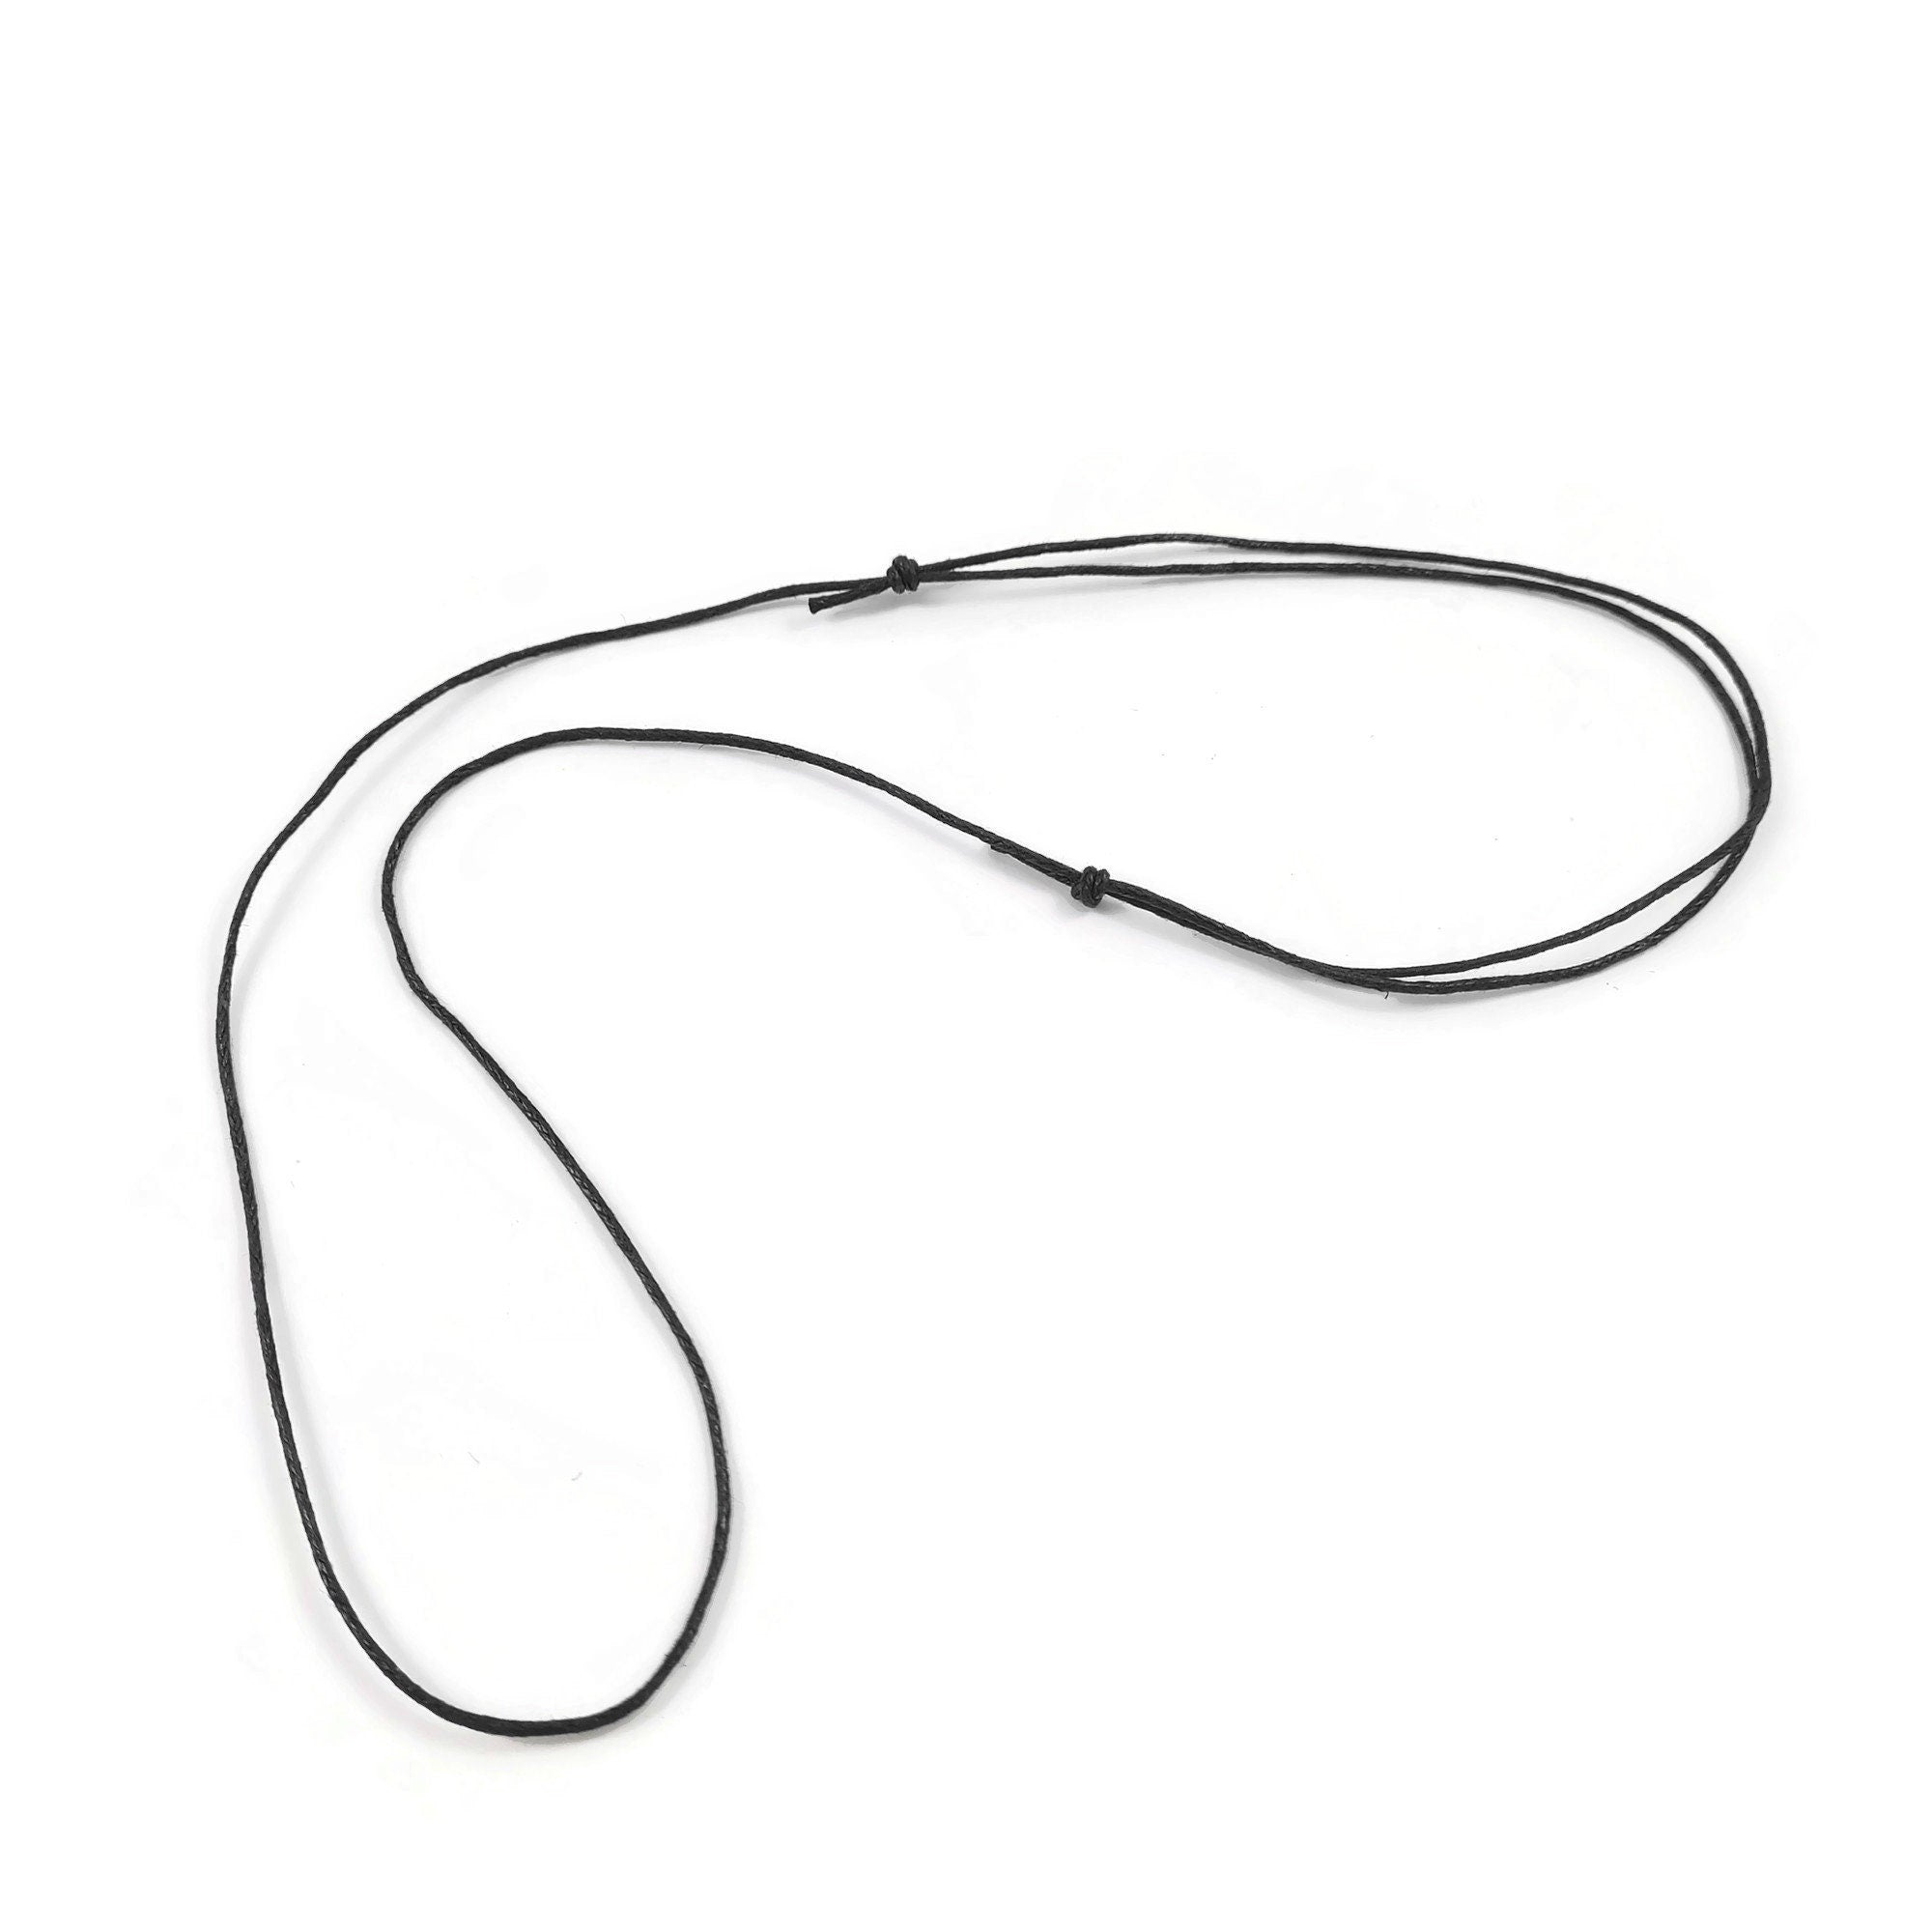 Adjustable cord necklace, Black waxed cotton string, 1mm, 2mm, Jewelry making bulk supplies